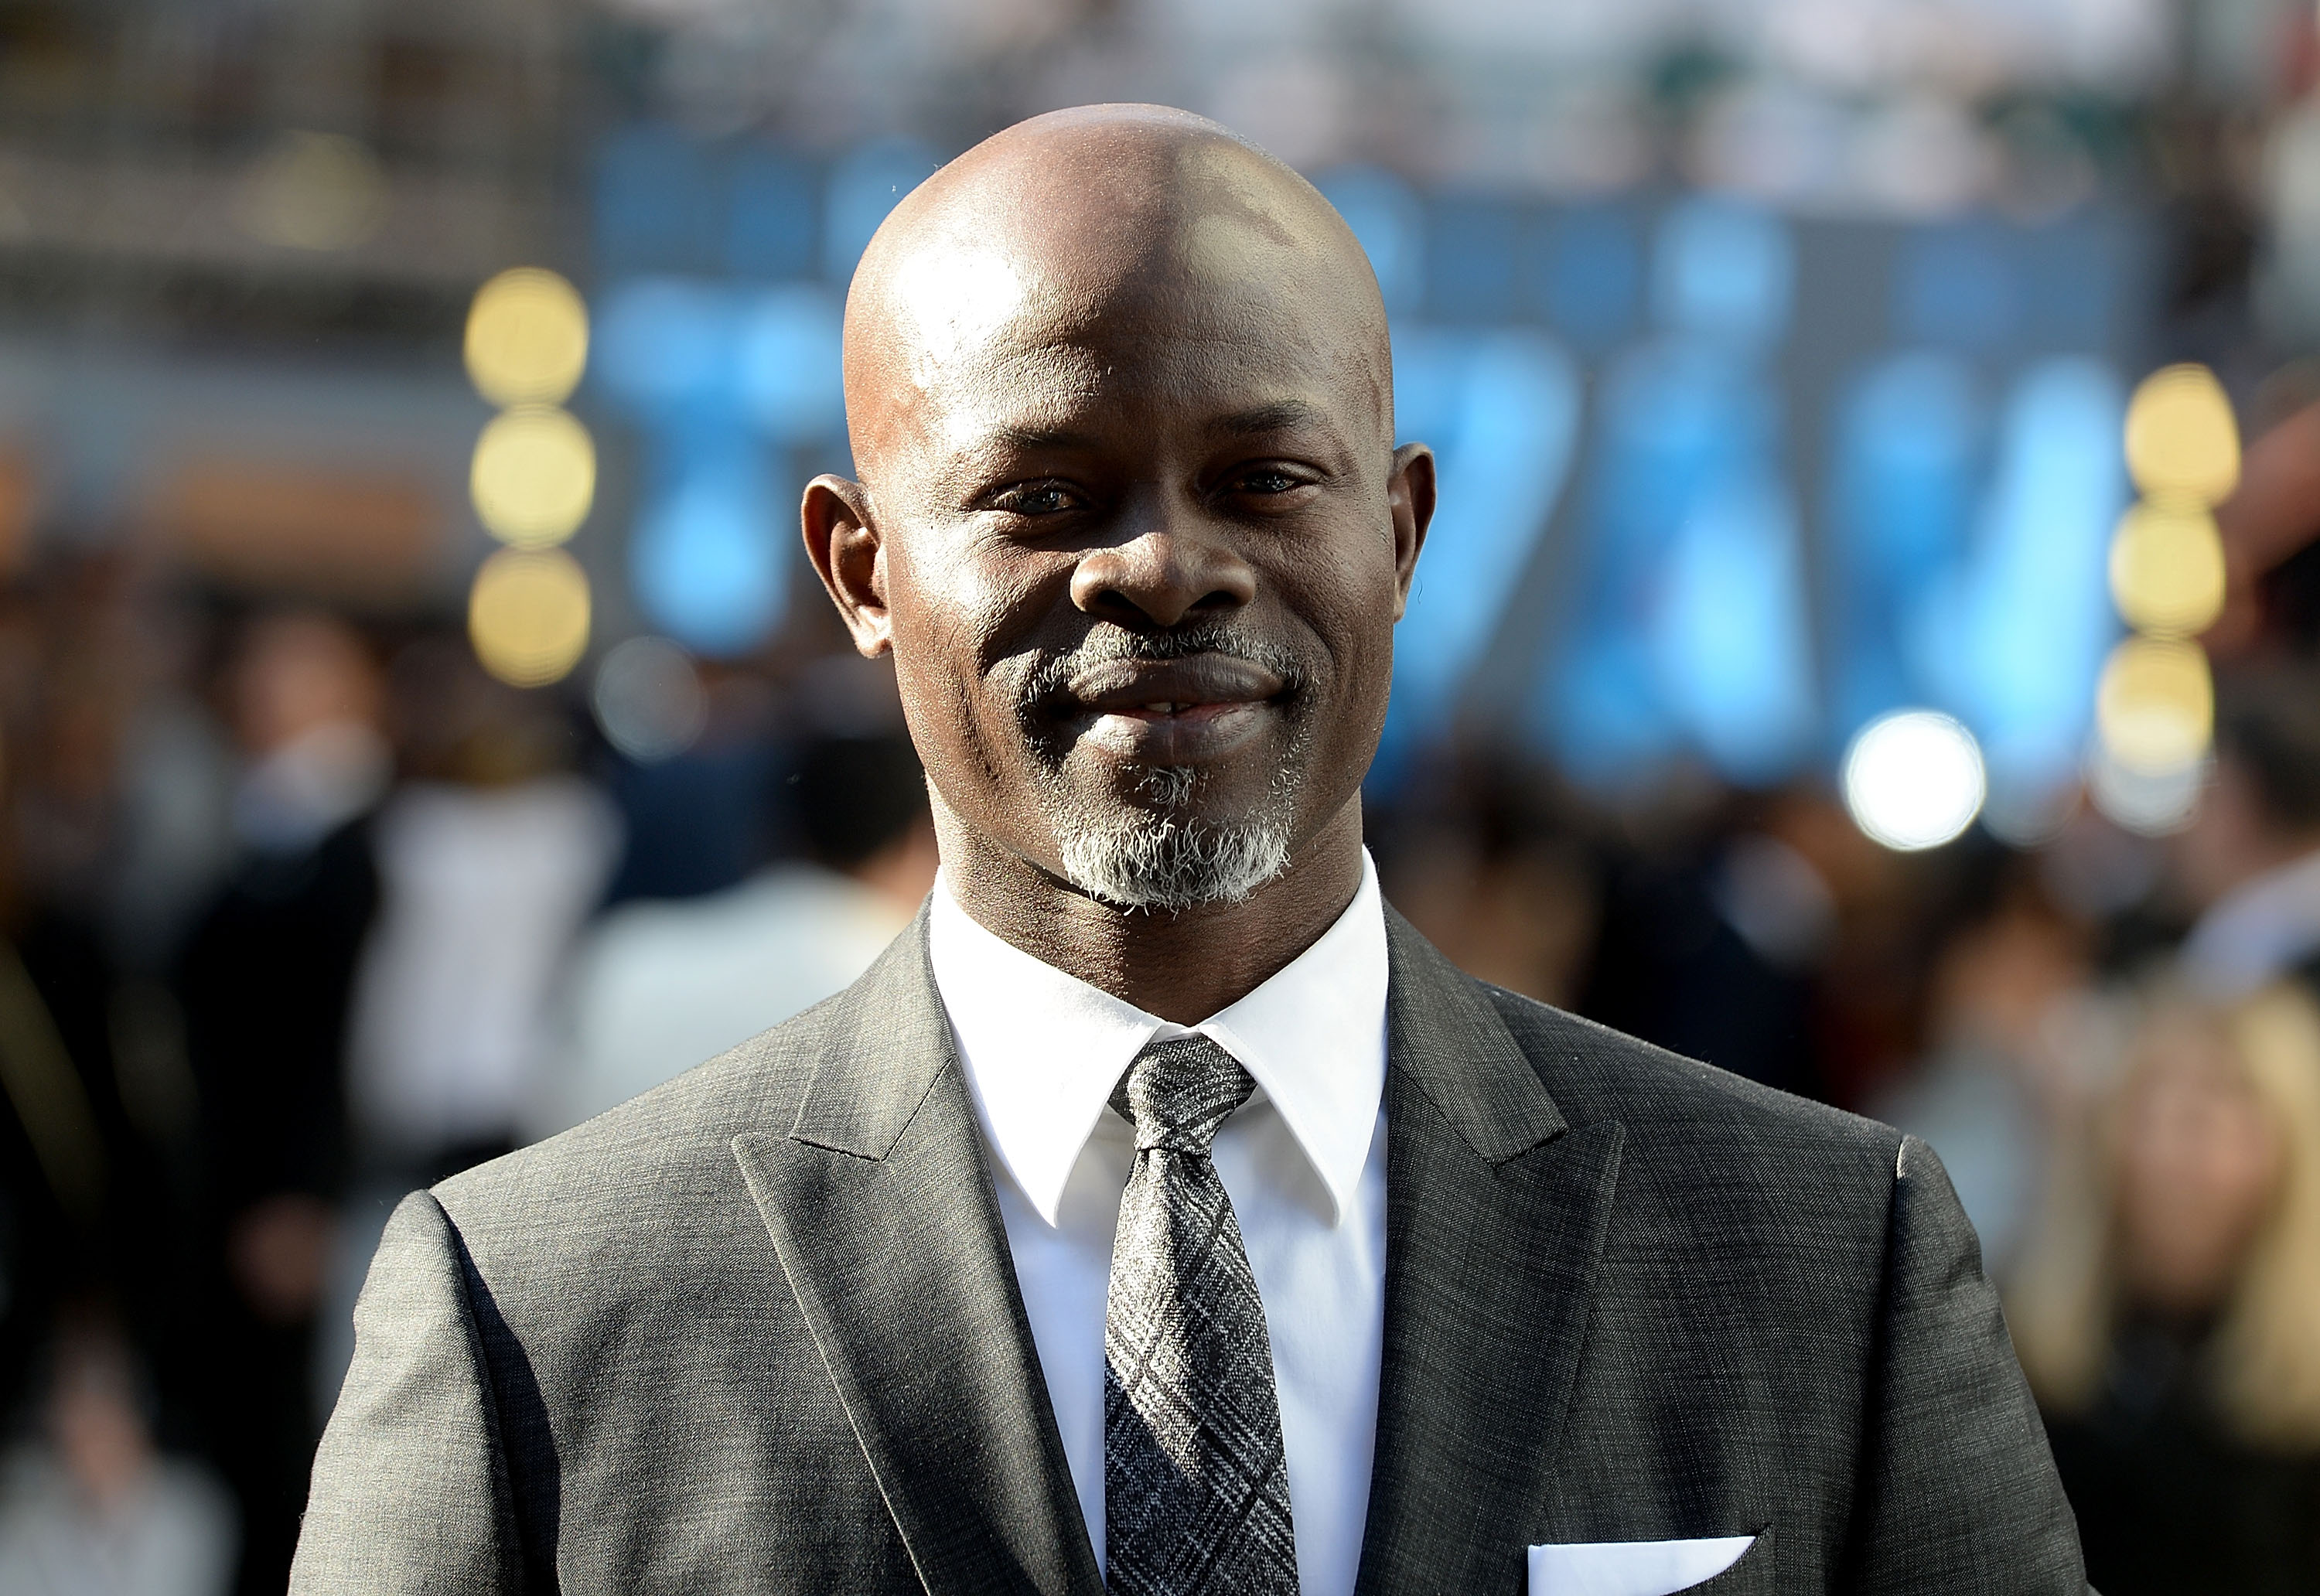 Djimon Hounsou attends the European premiere of "The Legend Of Tarzan" at Odeon Leicester Square in London on July 5, 2016.